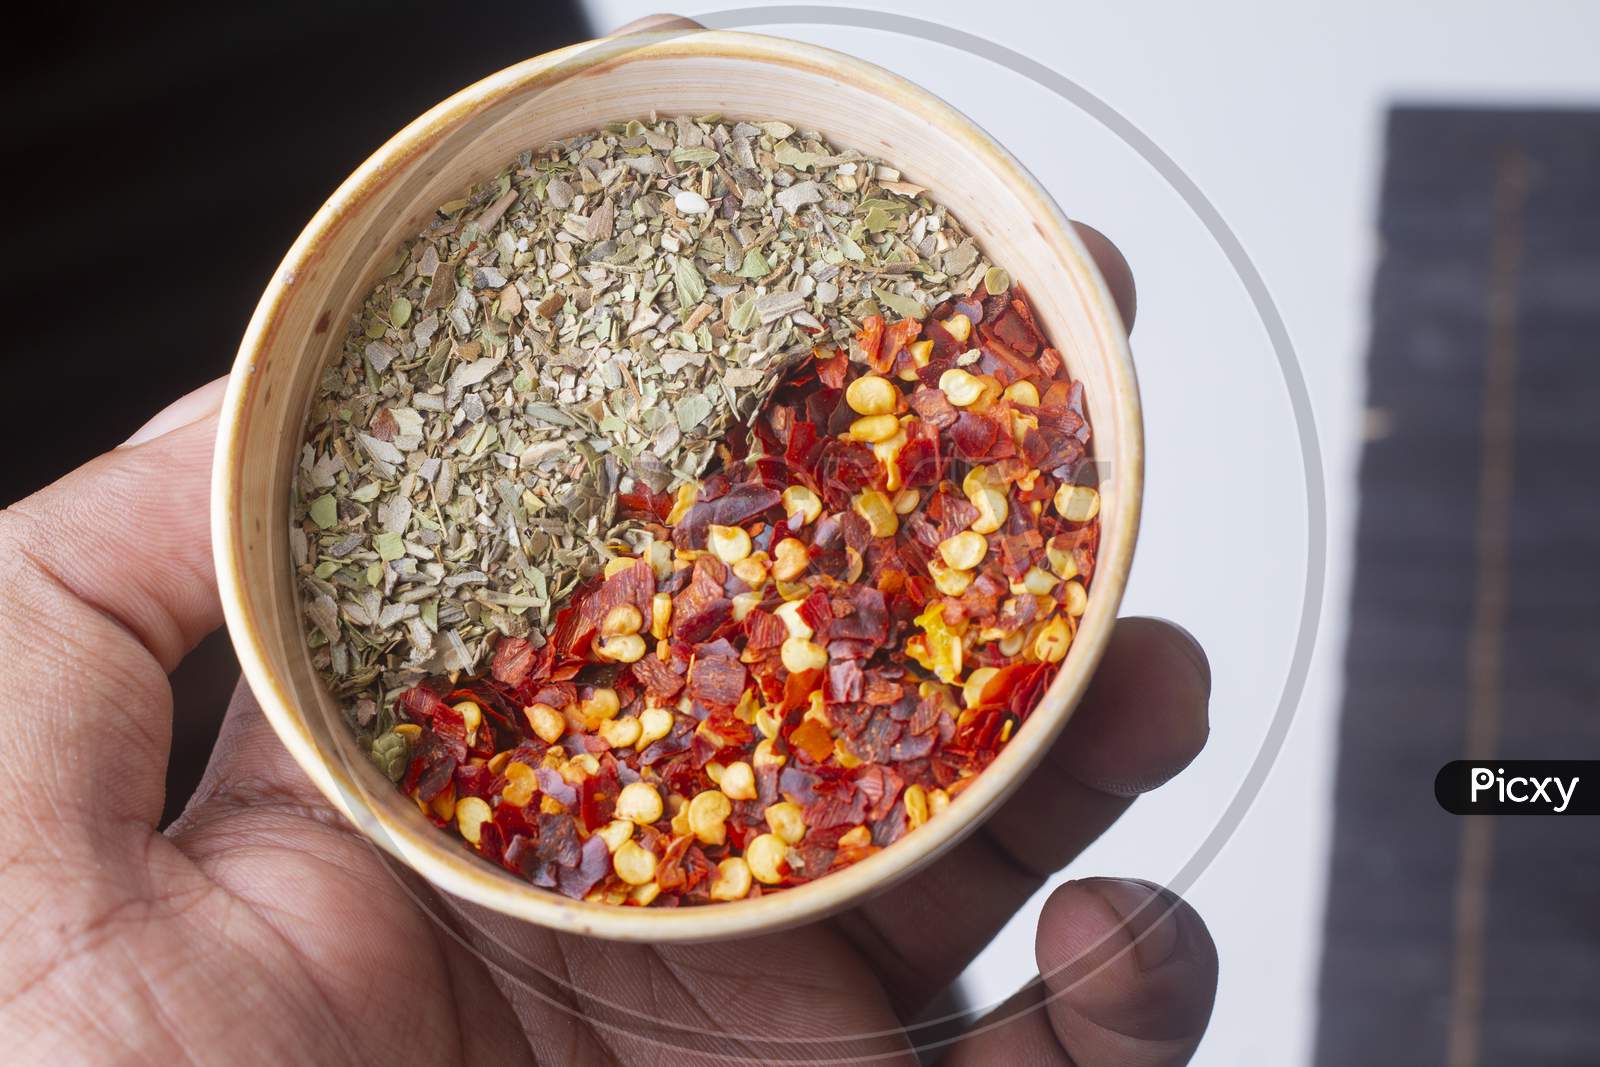 Chili Flakes And Oregano Bowl In Hand Isolated On Light Background